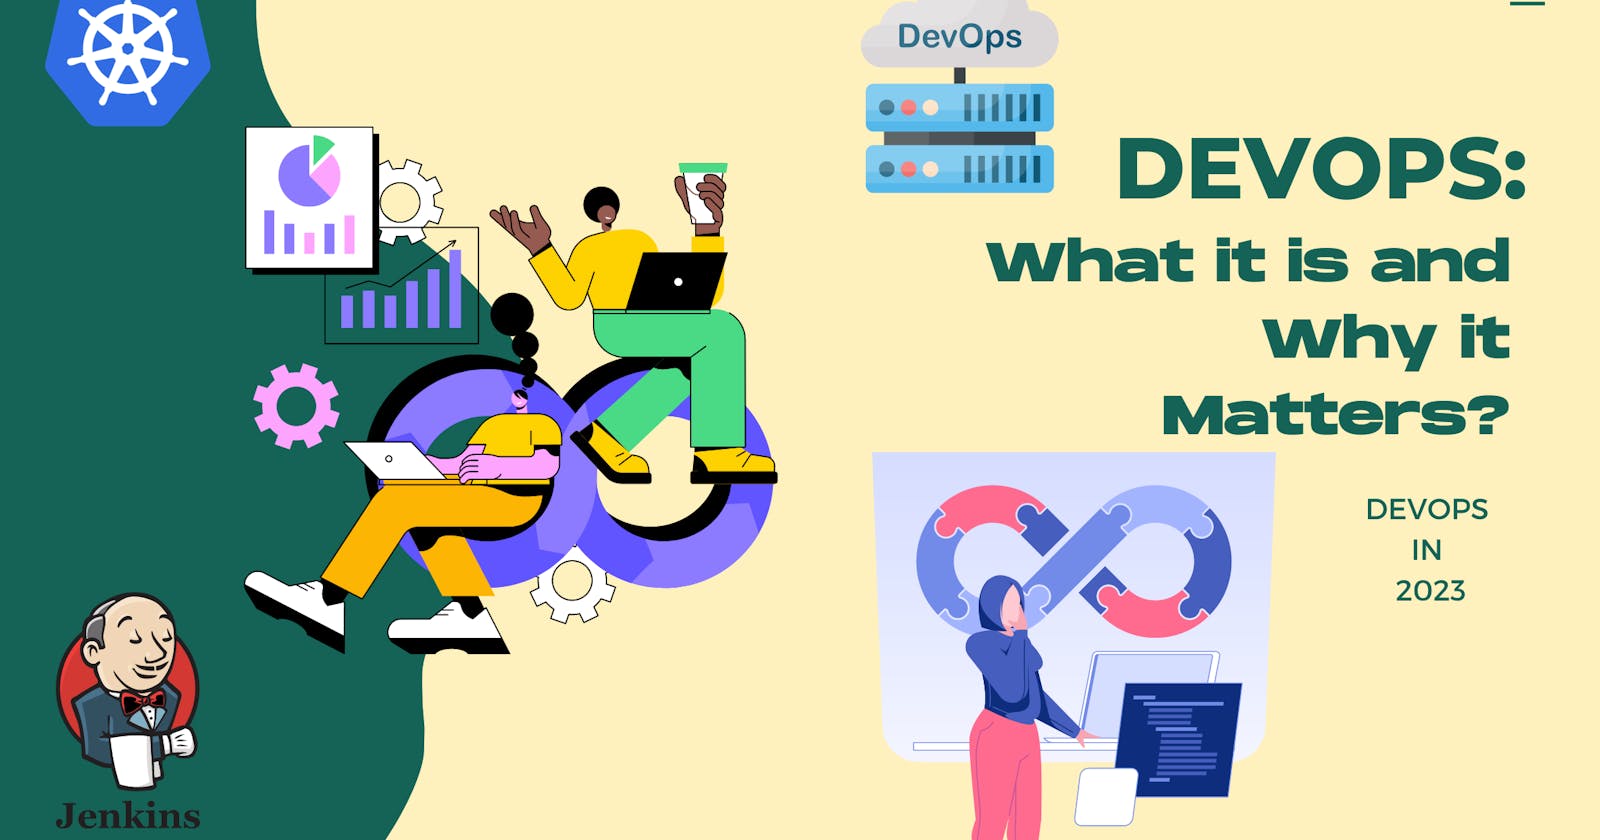 DevOps: What It Is and Why It Matters?